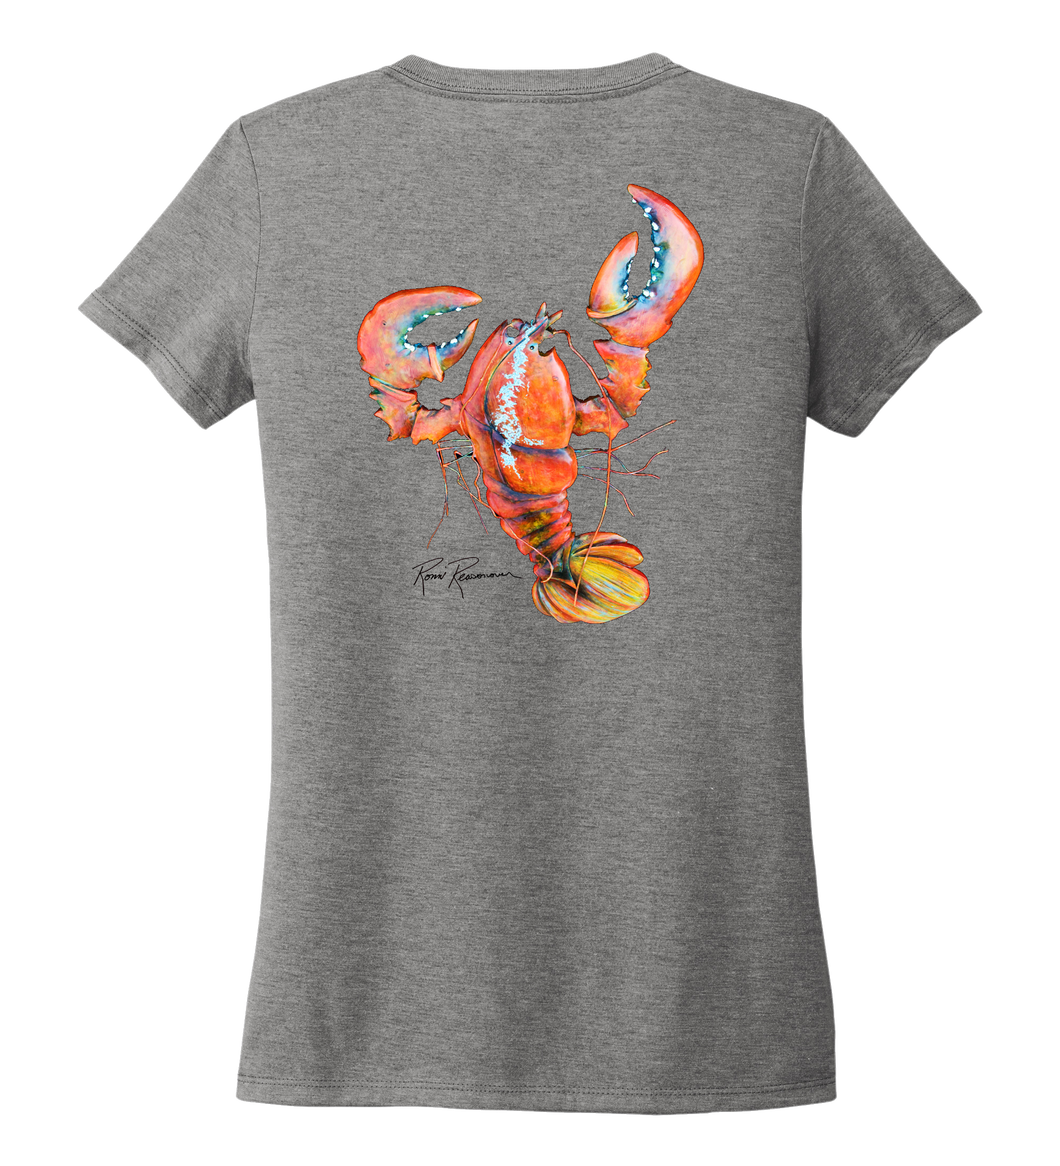 Reasonover, The Lobster, Women's V-neck T-shirt in Oyster Grey